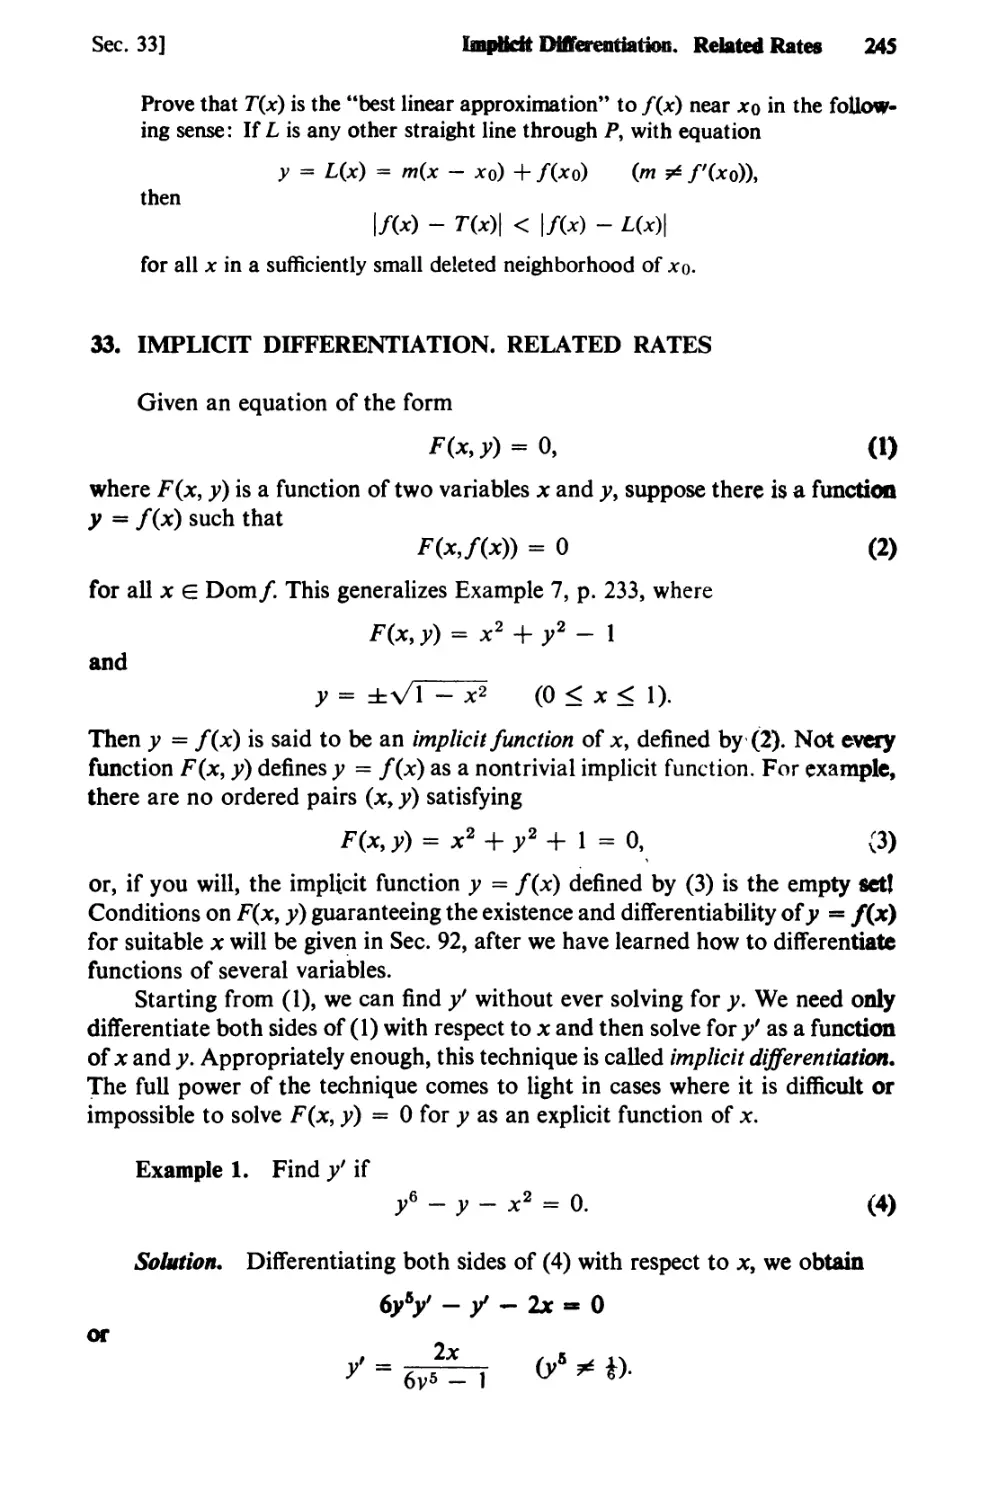 33. Implicit Difierentiation. Related Rates